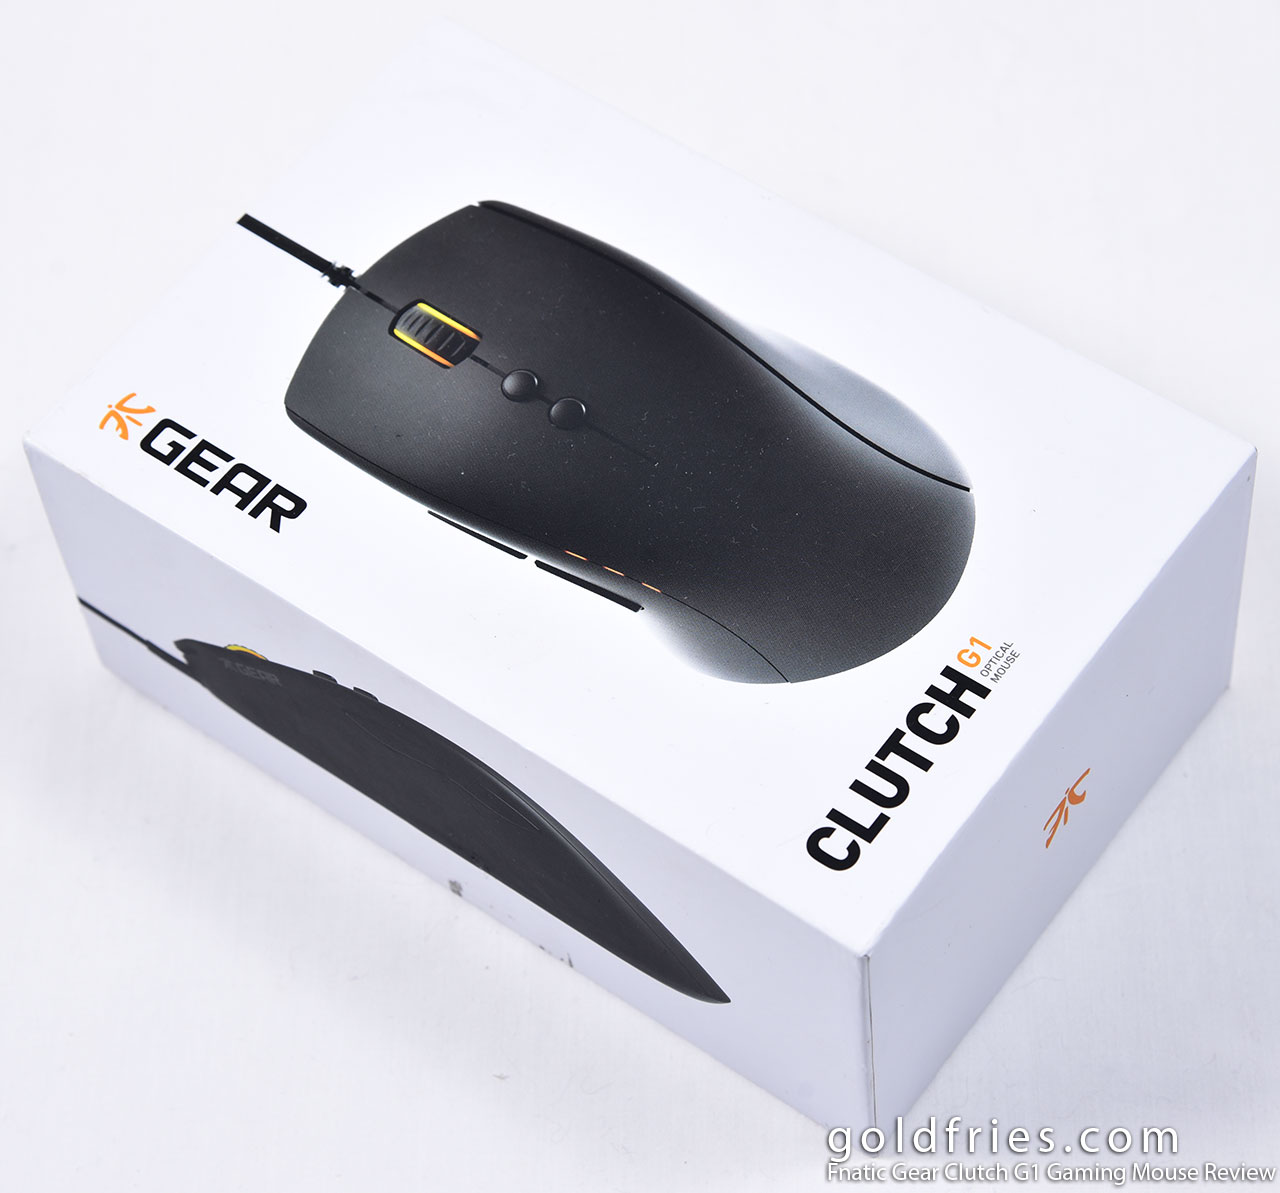 Fnatic Gear Clutch G1 Gaming Mouse Review